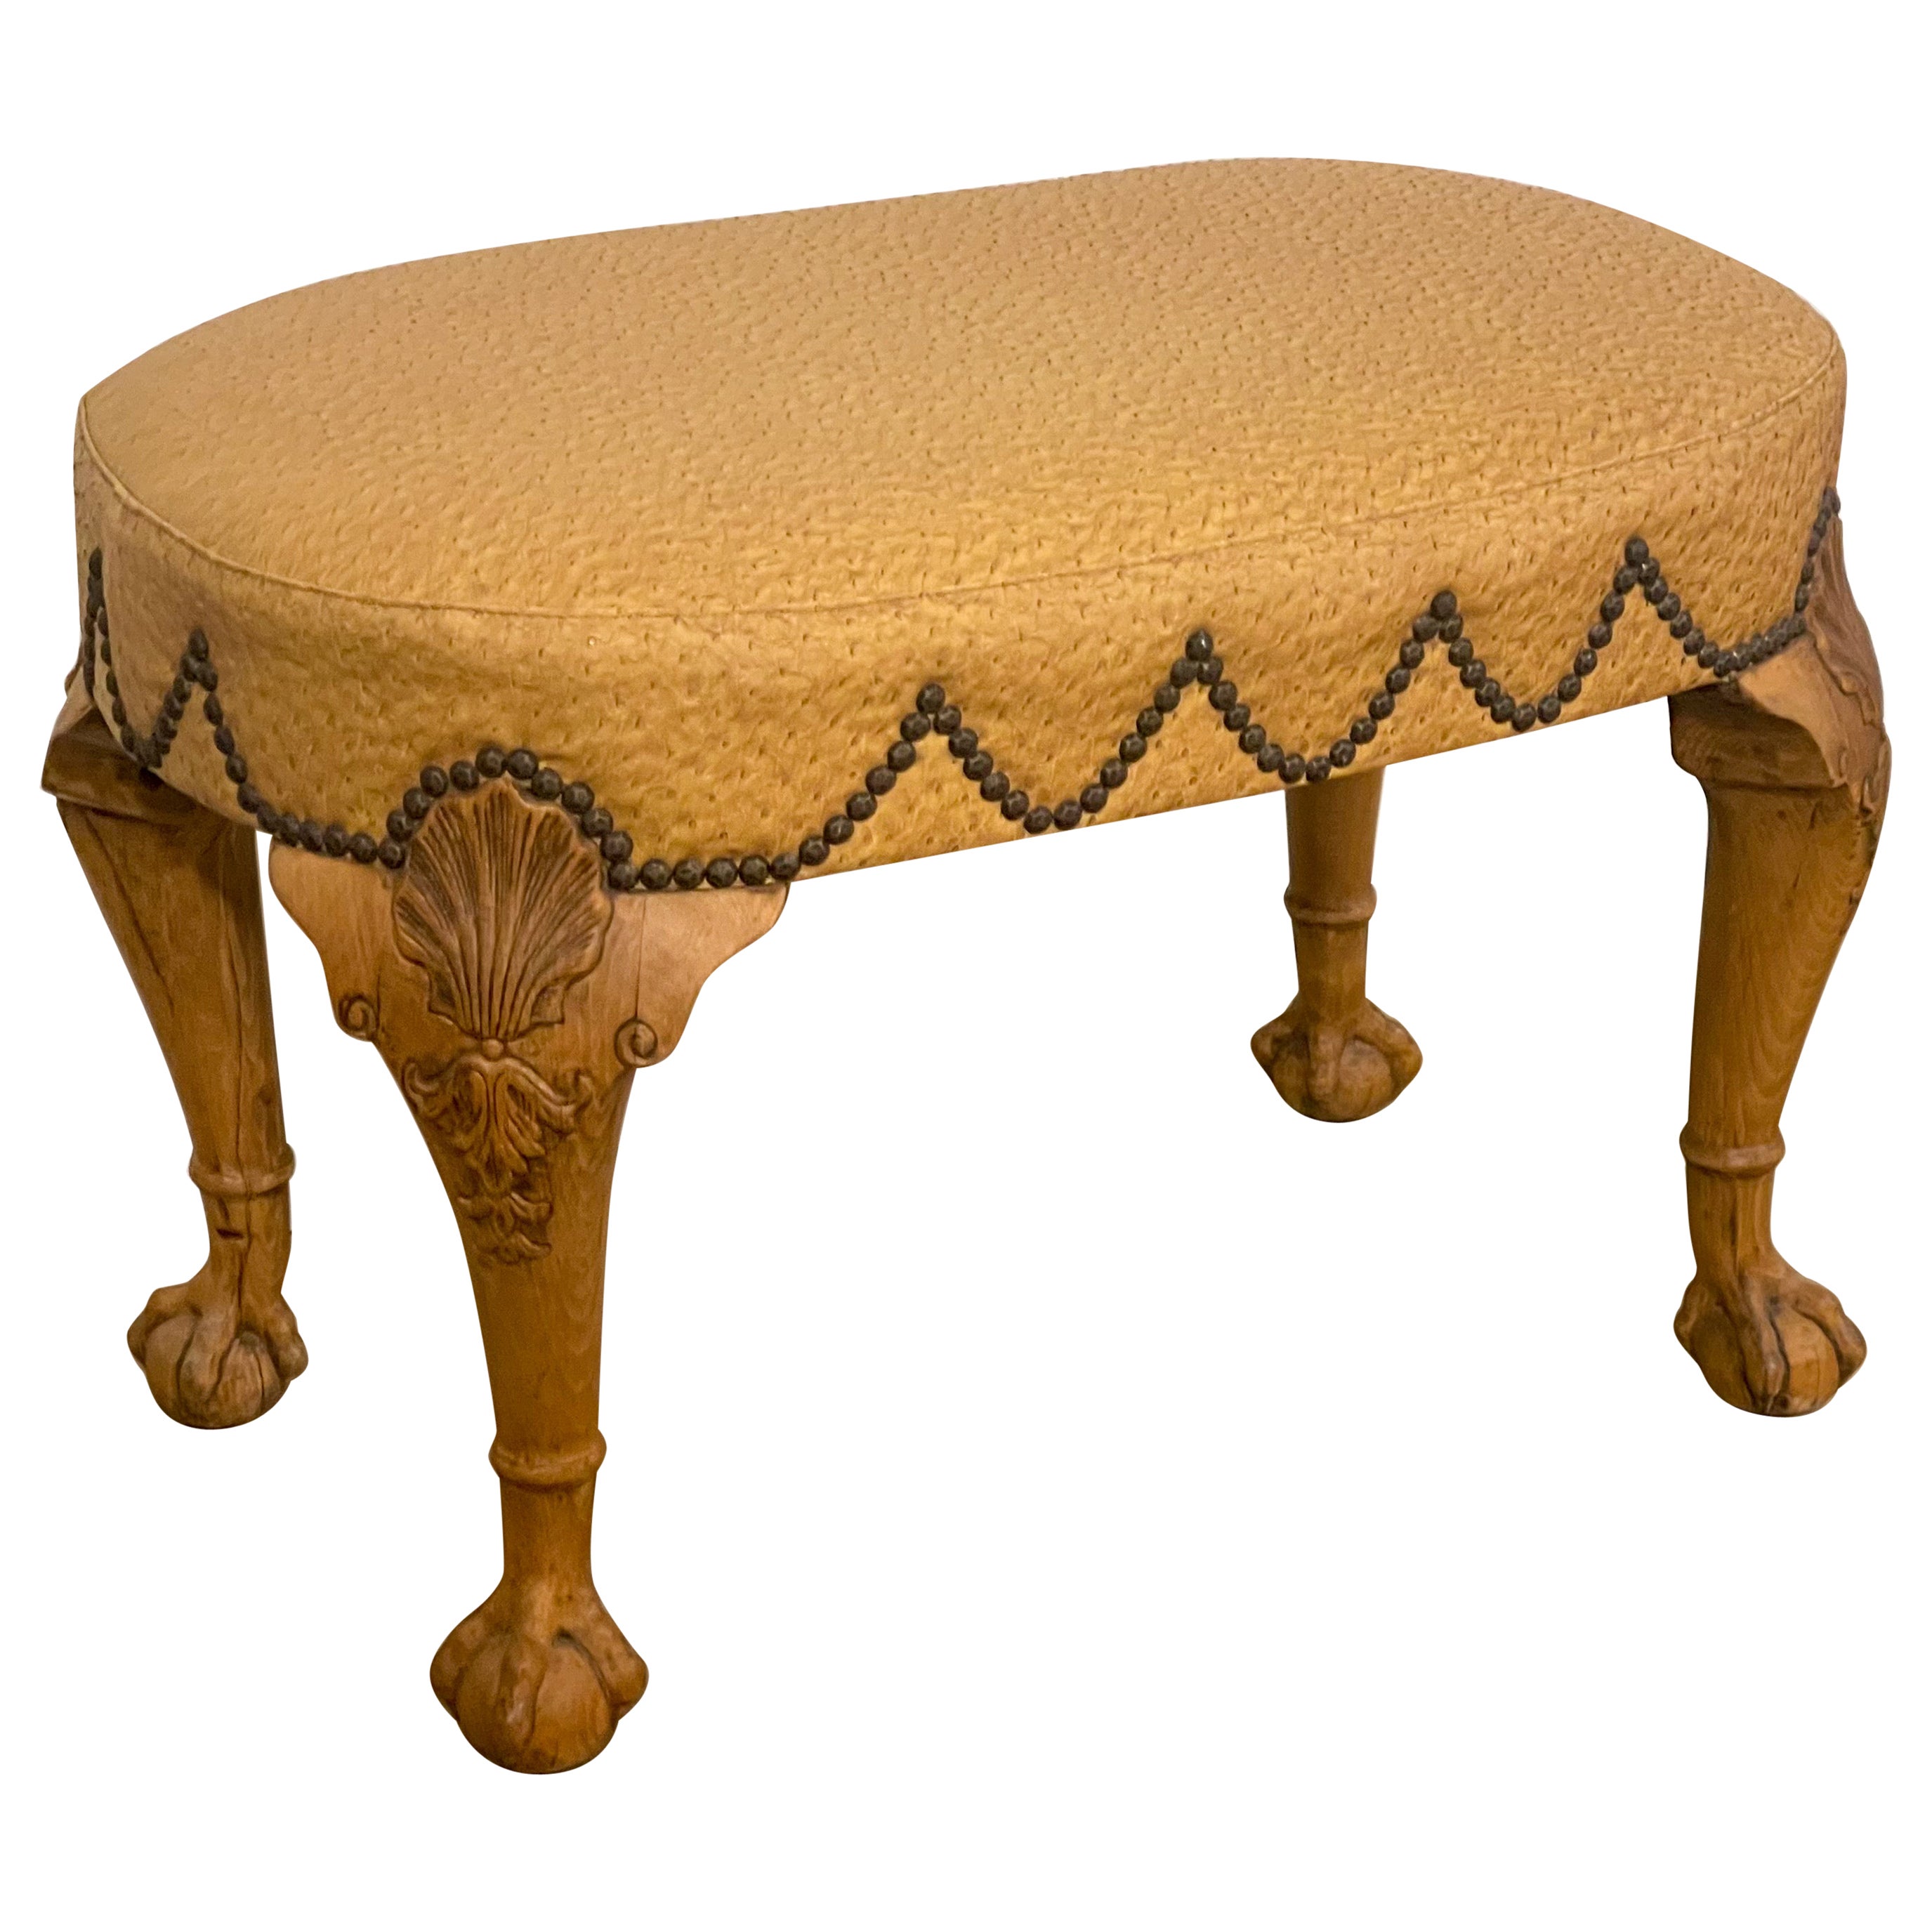 Italian Georgian Style Carved Fruitwood Bench / Ottoman in Ostrich Leather